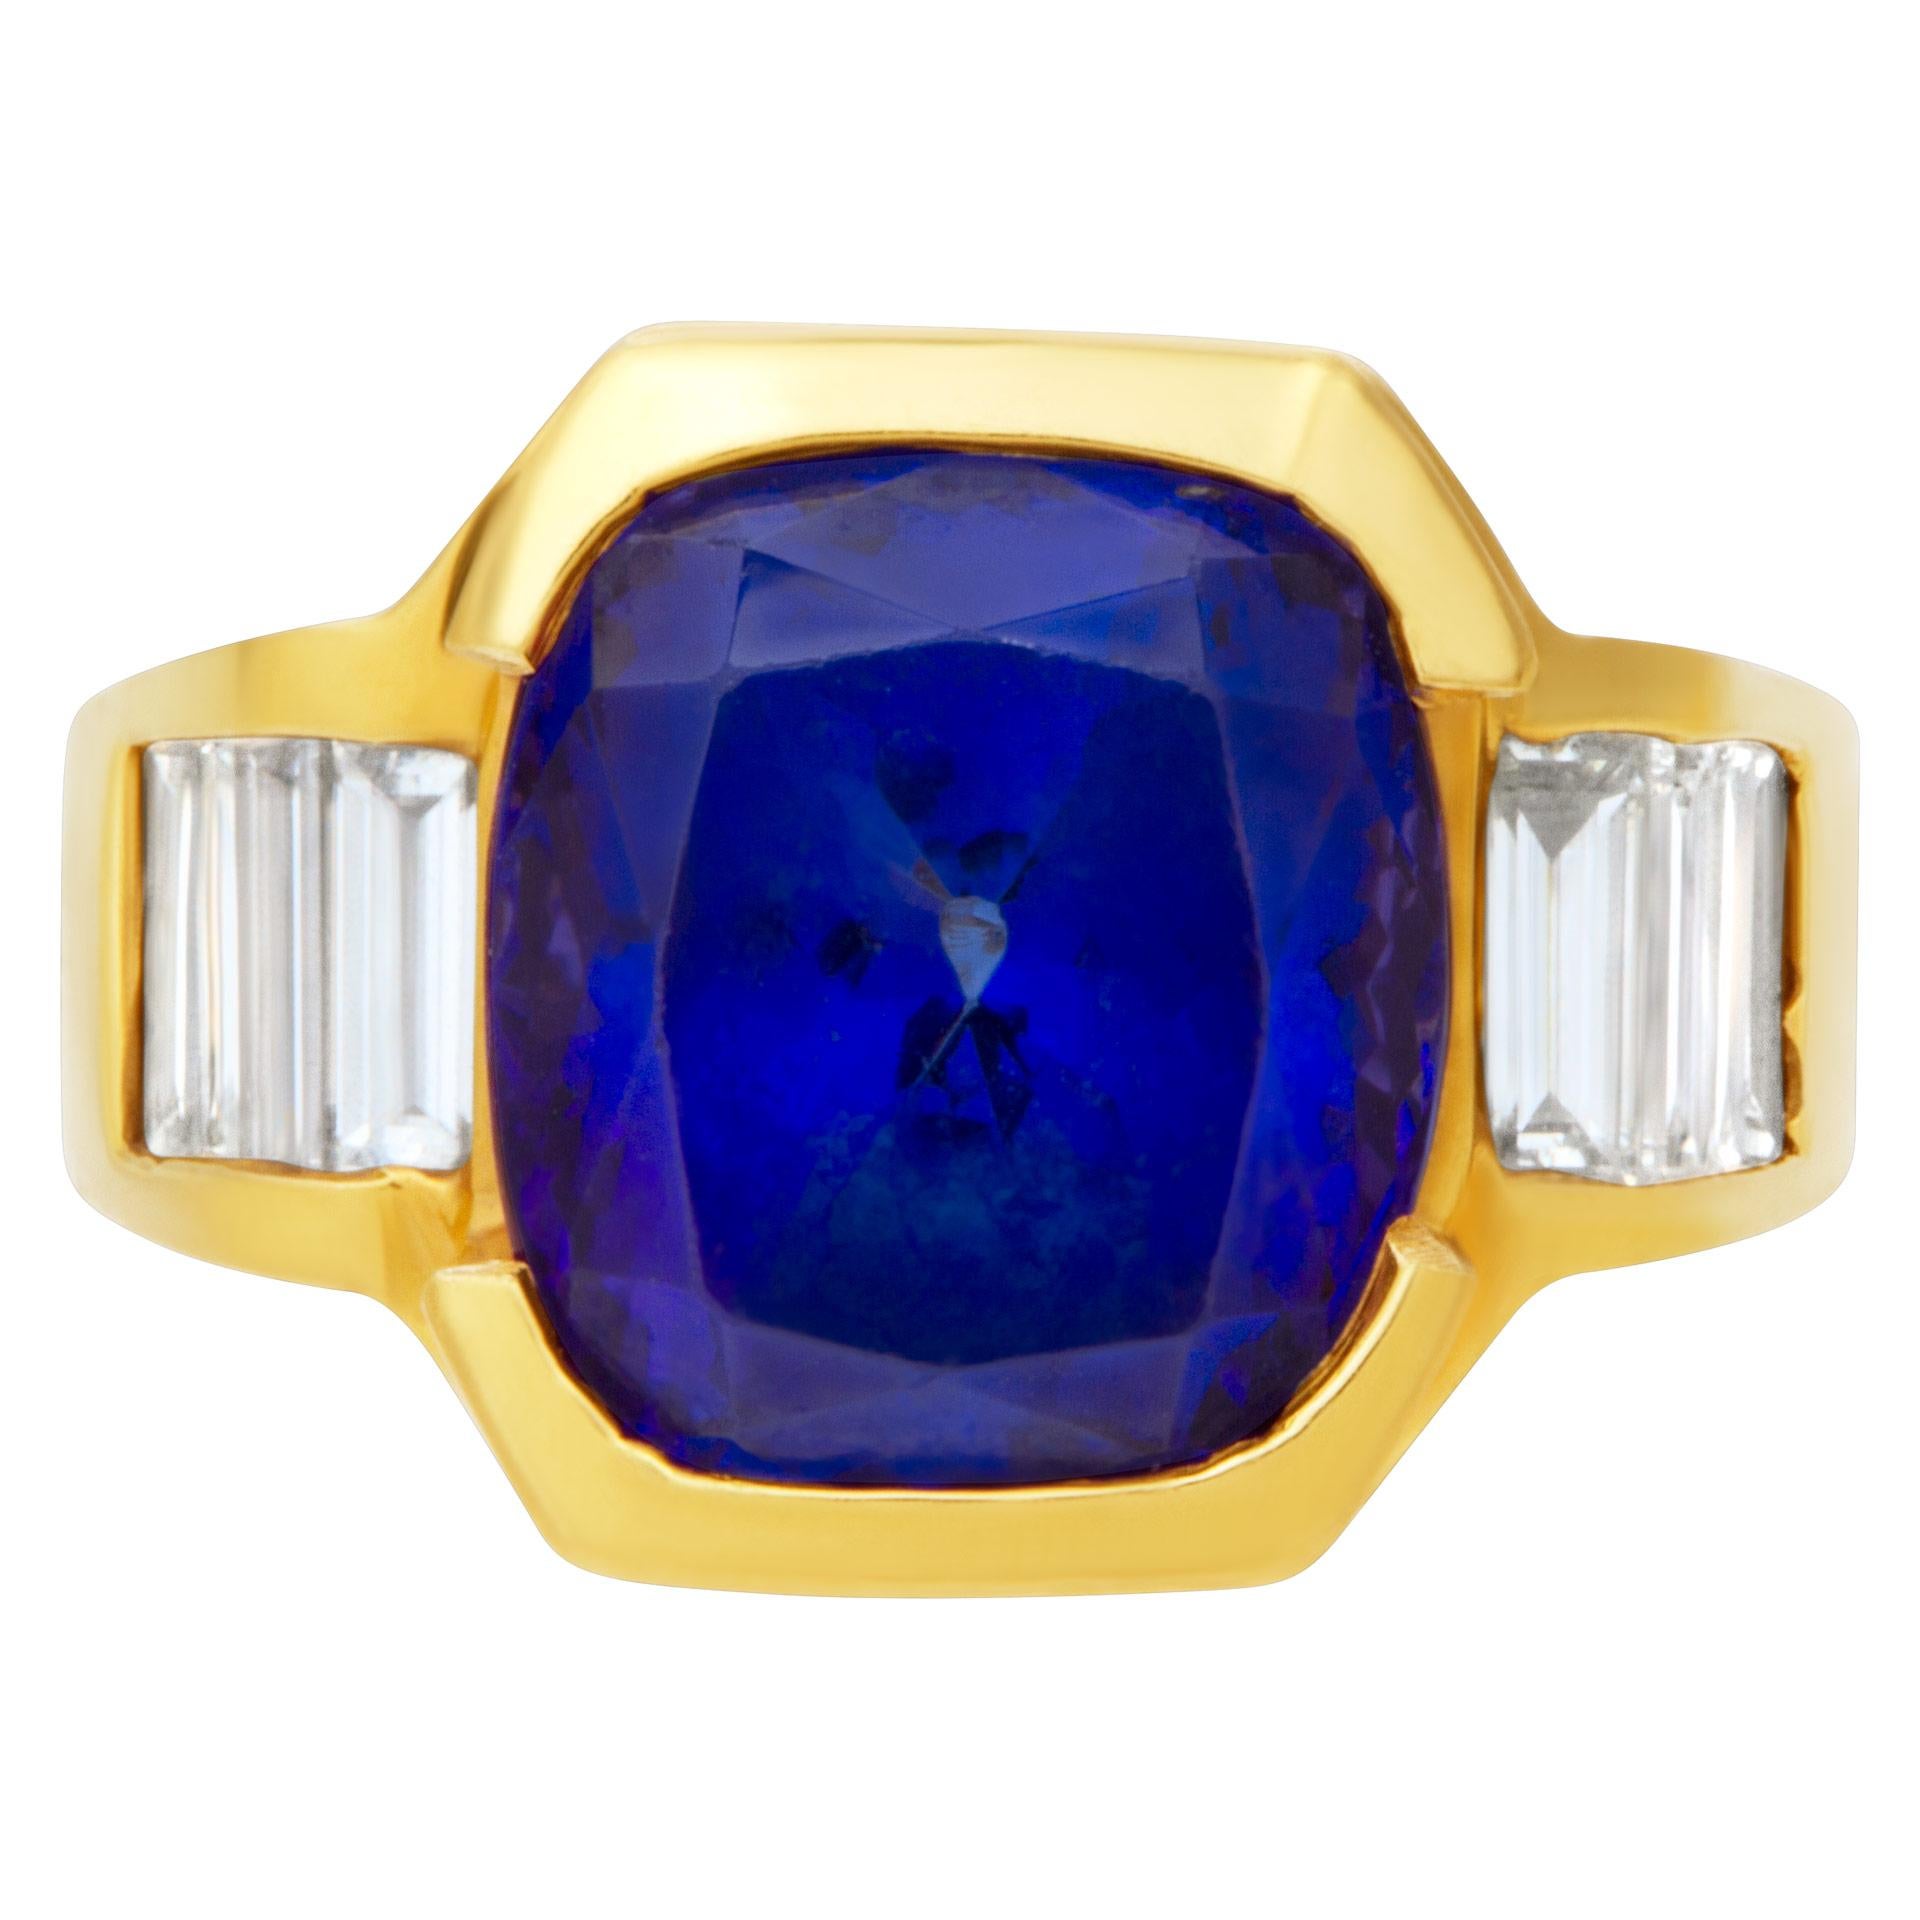 AGL certified striking Violet Blue gem Tanzanite 9.52 carat diamond ring with 8 straight baguette diamonds 1.0 carats mounted in robust 18k setting. Size 6.75. This Tanzanite ring is currently size 6.75 and some items can be sized up or down, please